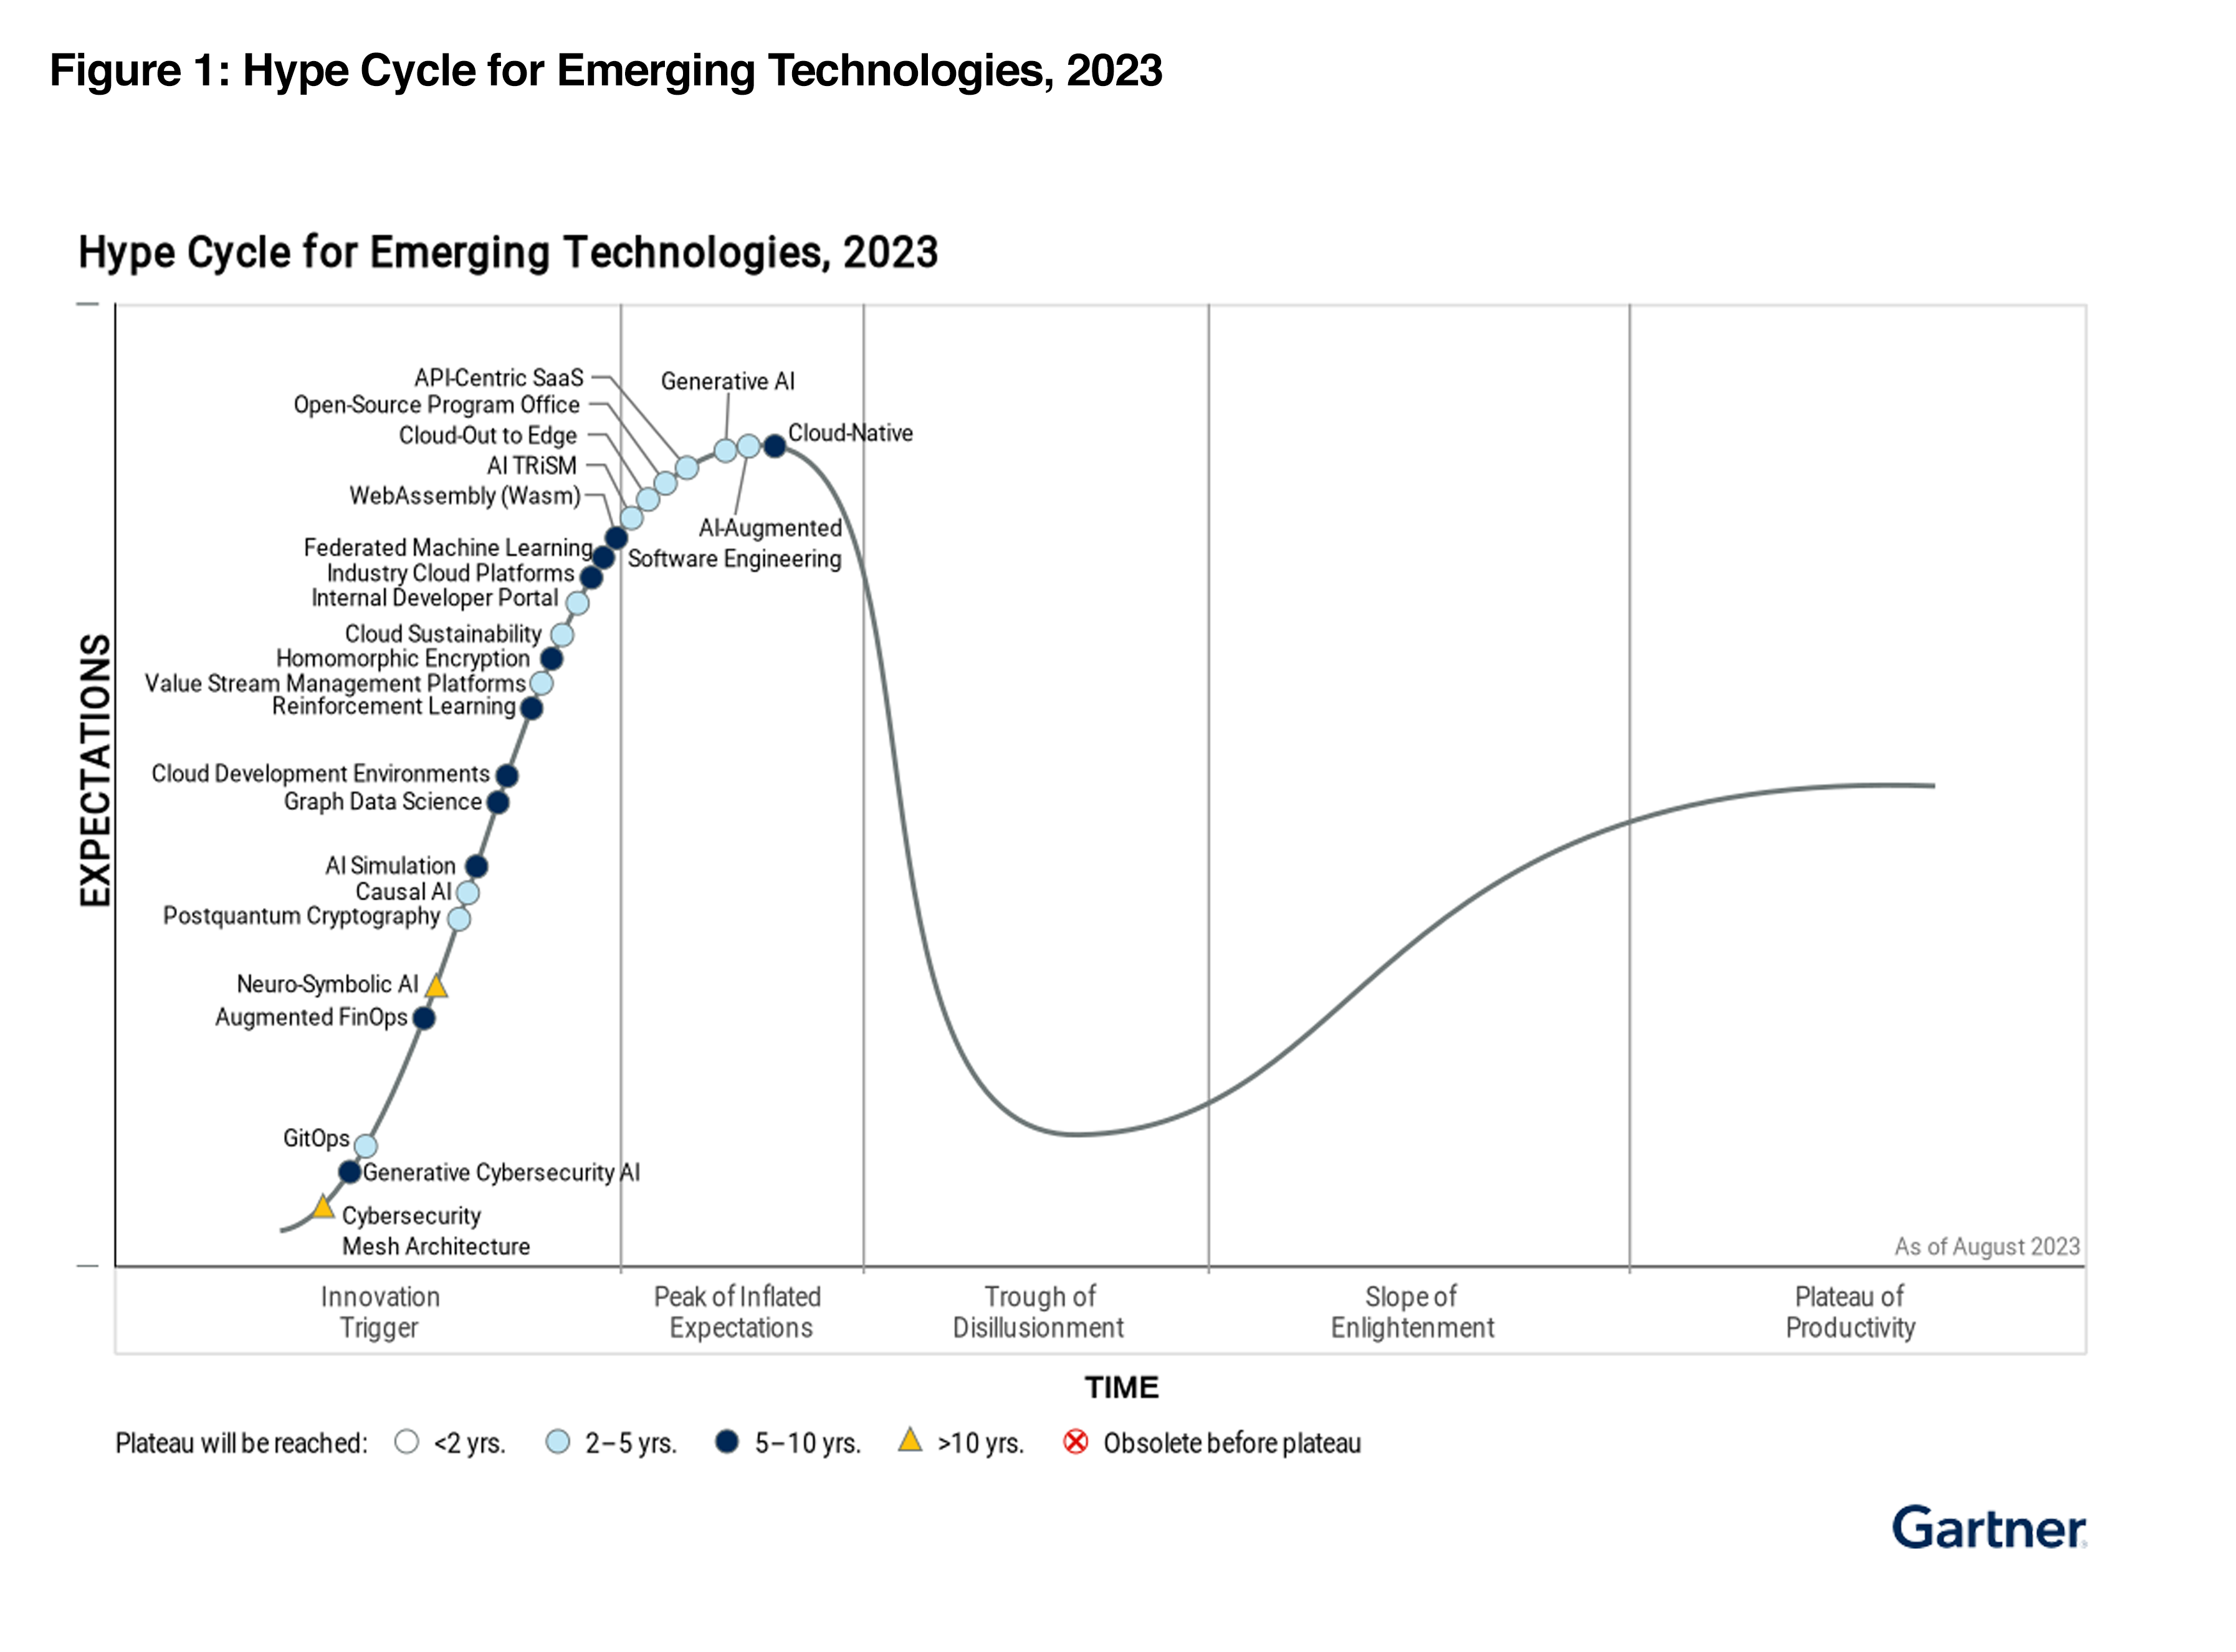 Hype Cycle for Emergin Technologies, 2023